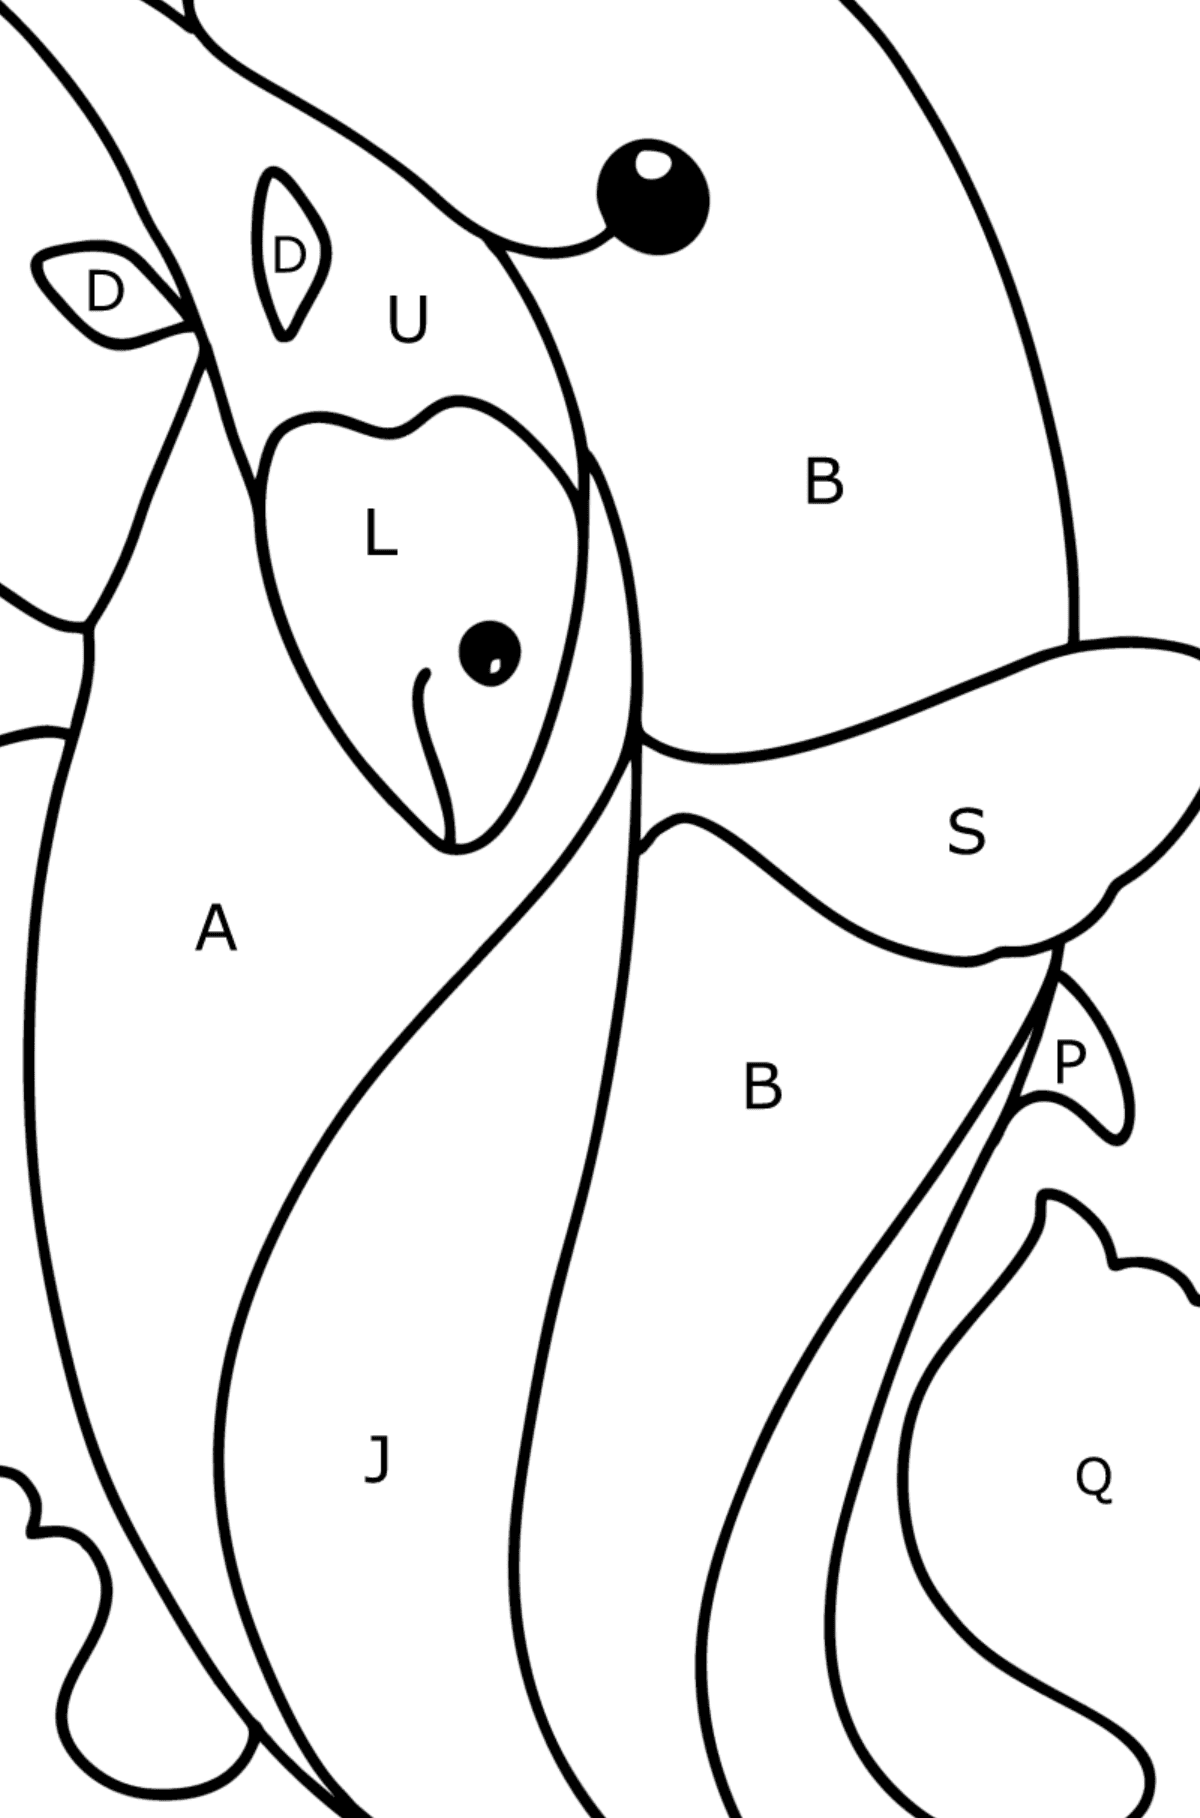 Dolphin Caught a Fish coloring page - Coloring by Letters for Kids